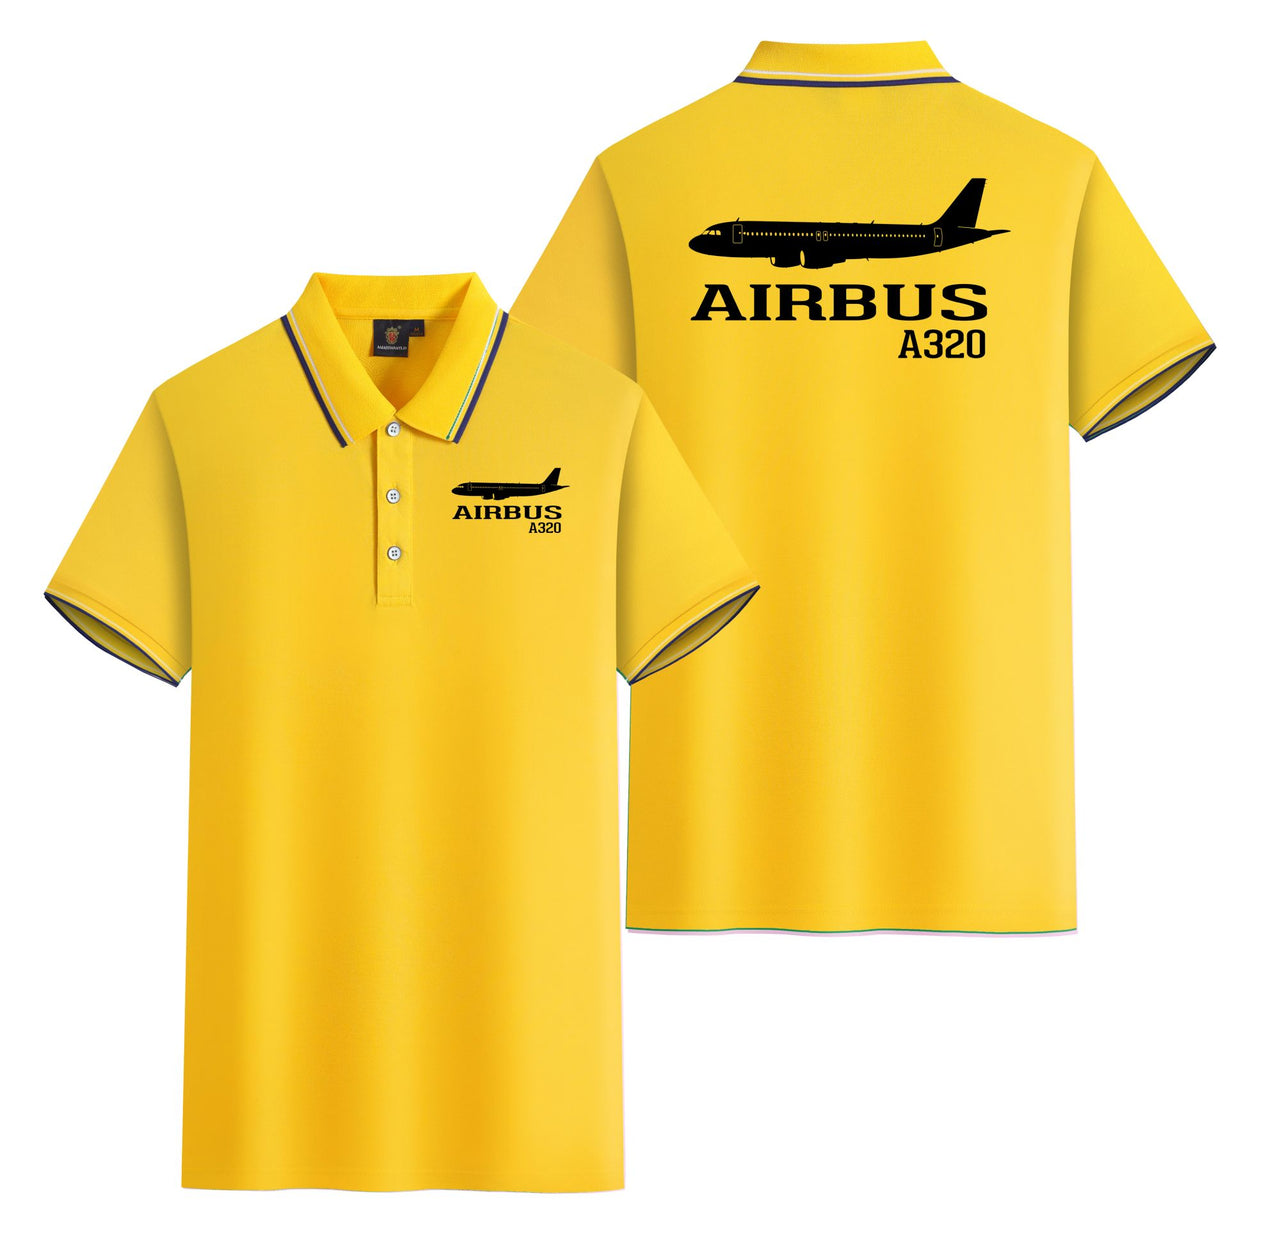 Airbus A320 Printed Designed Stylish Polo T-Shirts (Double-Side)